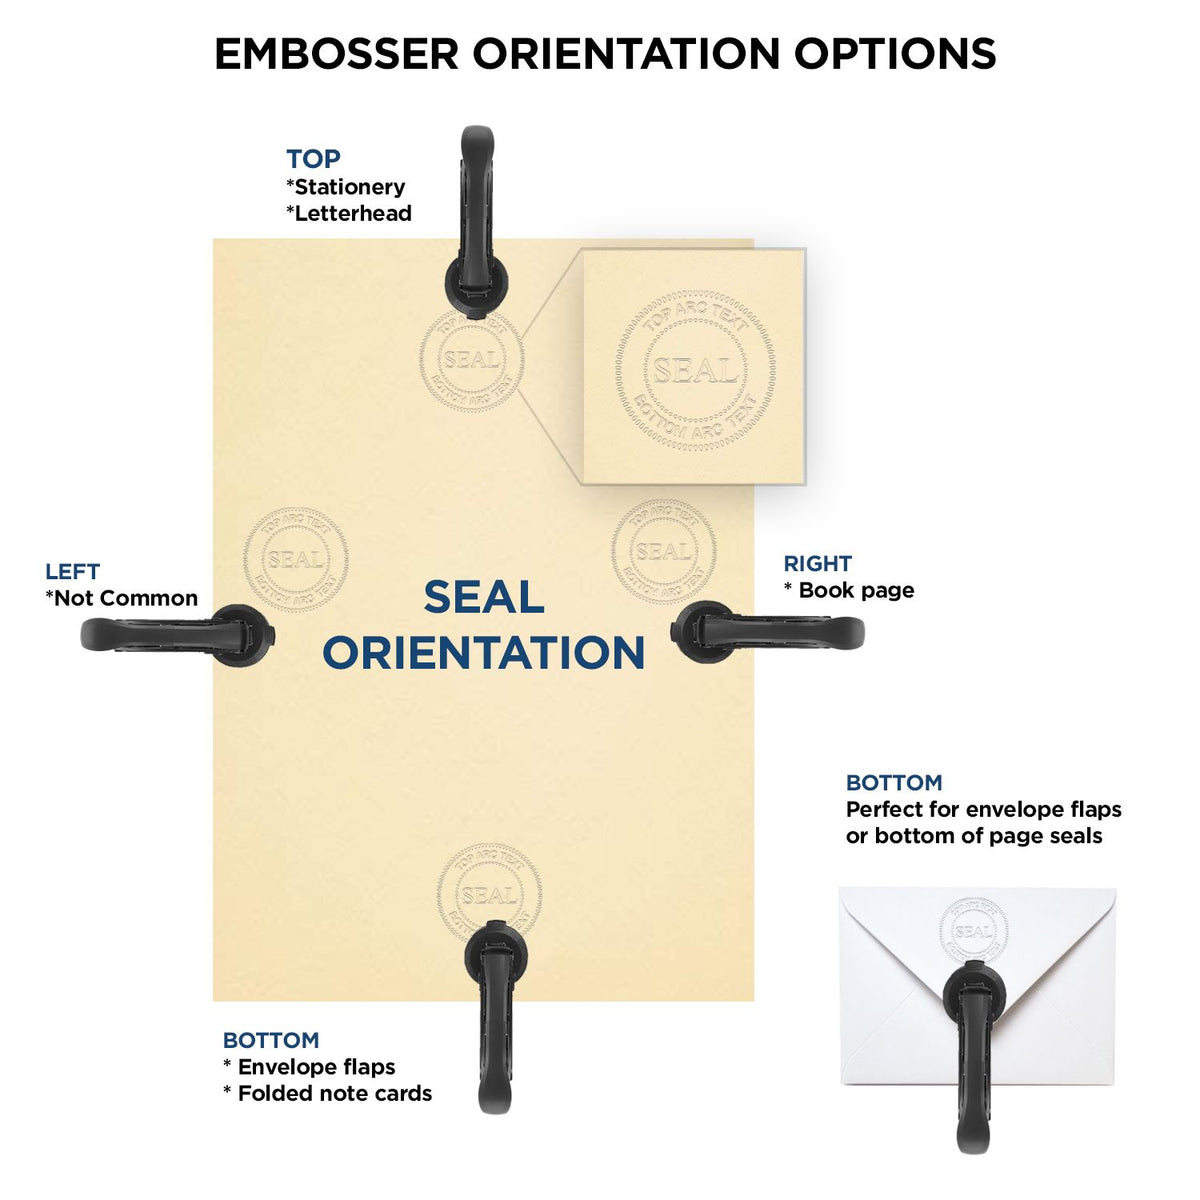 An infographic for the Hybrid Delaware Land Surveyor Seal showing embosser orientation, this is showing examples of a top, bottom, right and left insert.